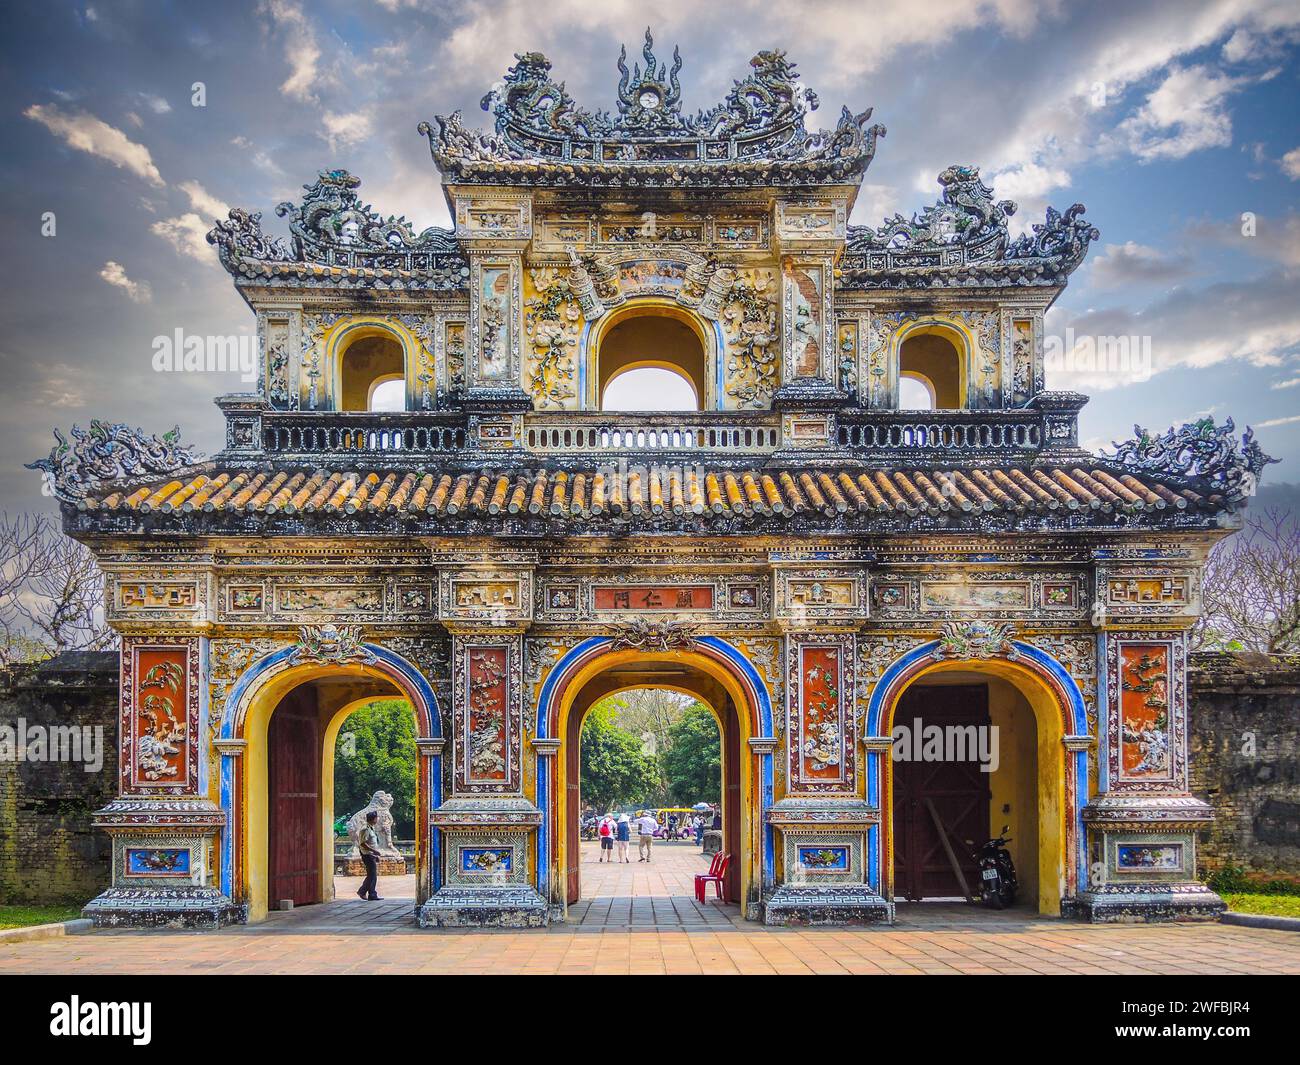 Hien Nhon Gate Imperial Palace Hue Foto Stock